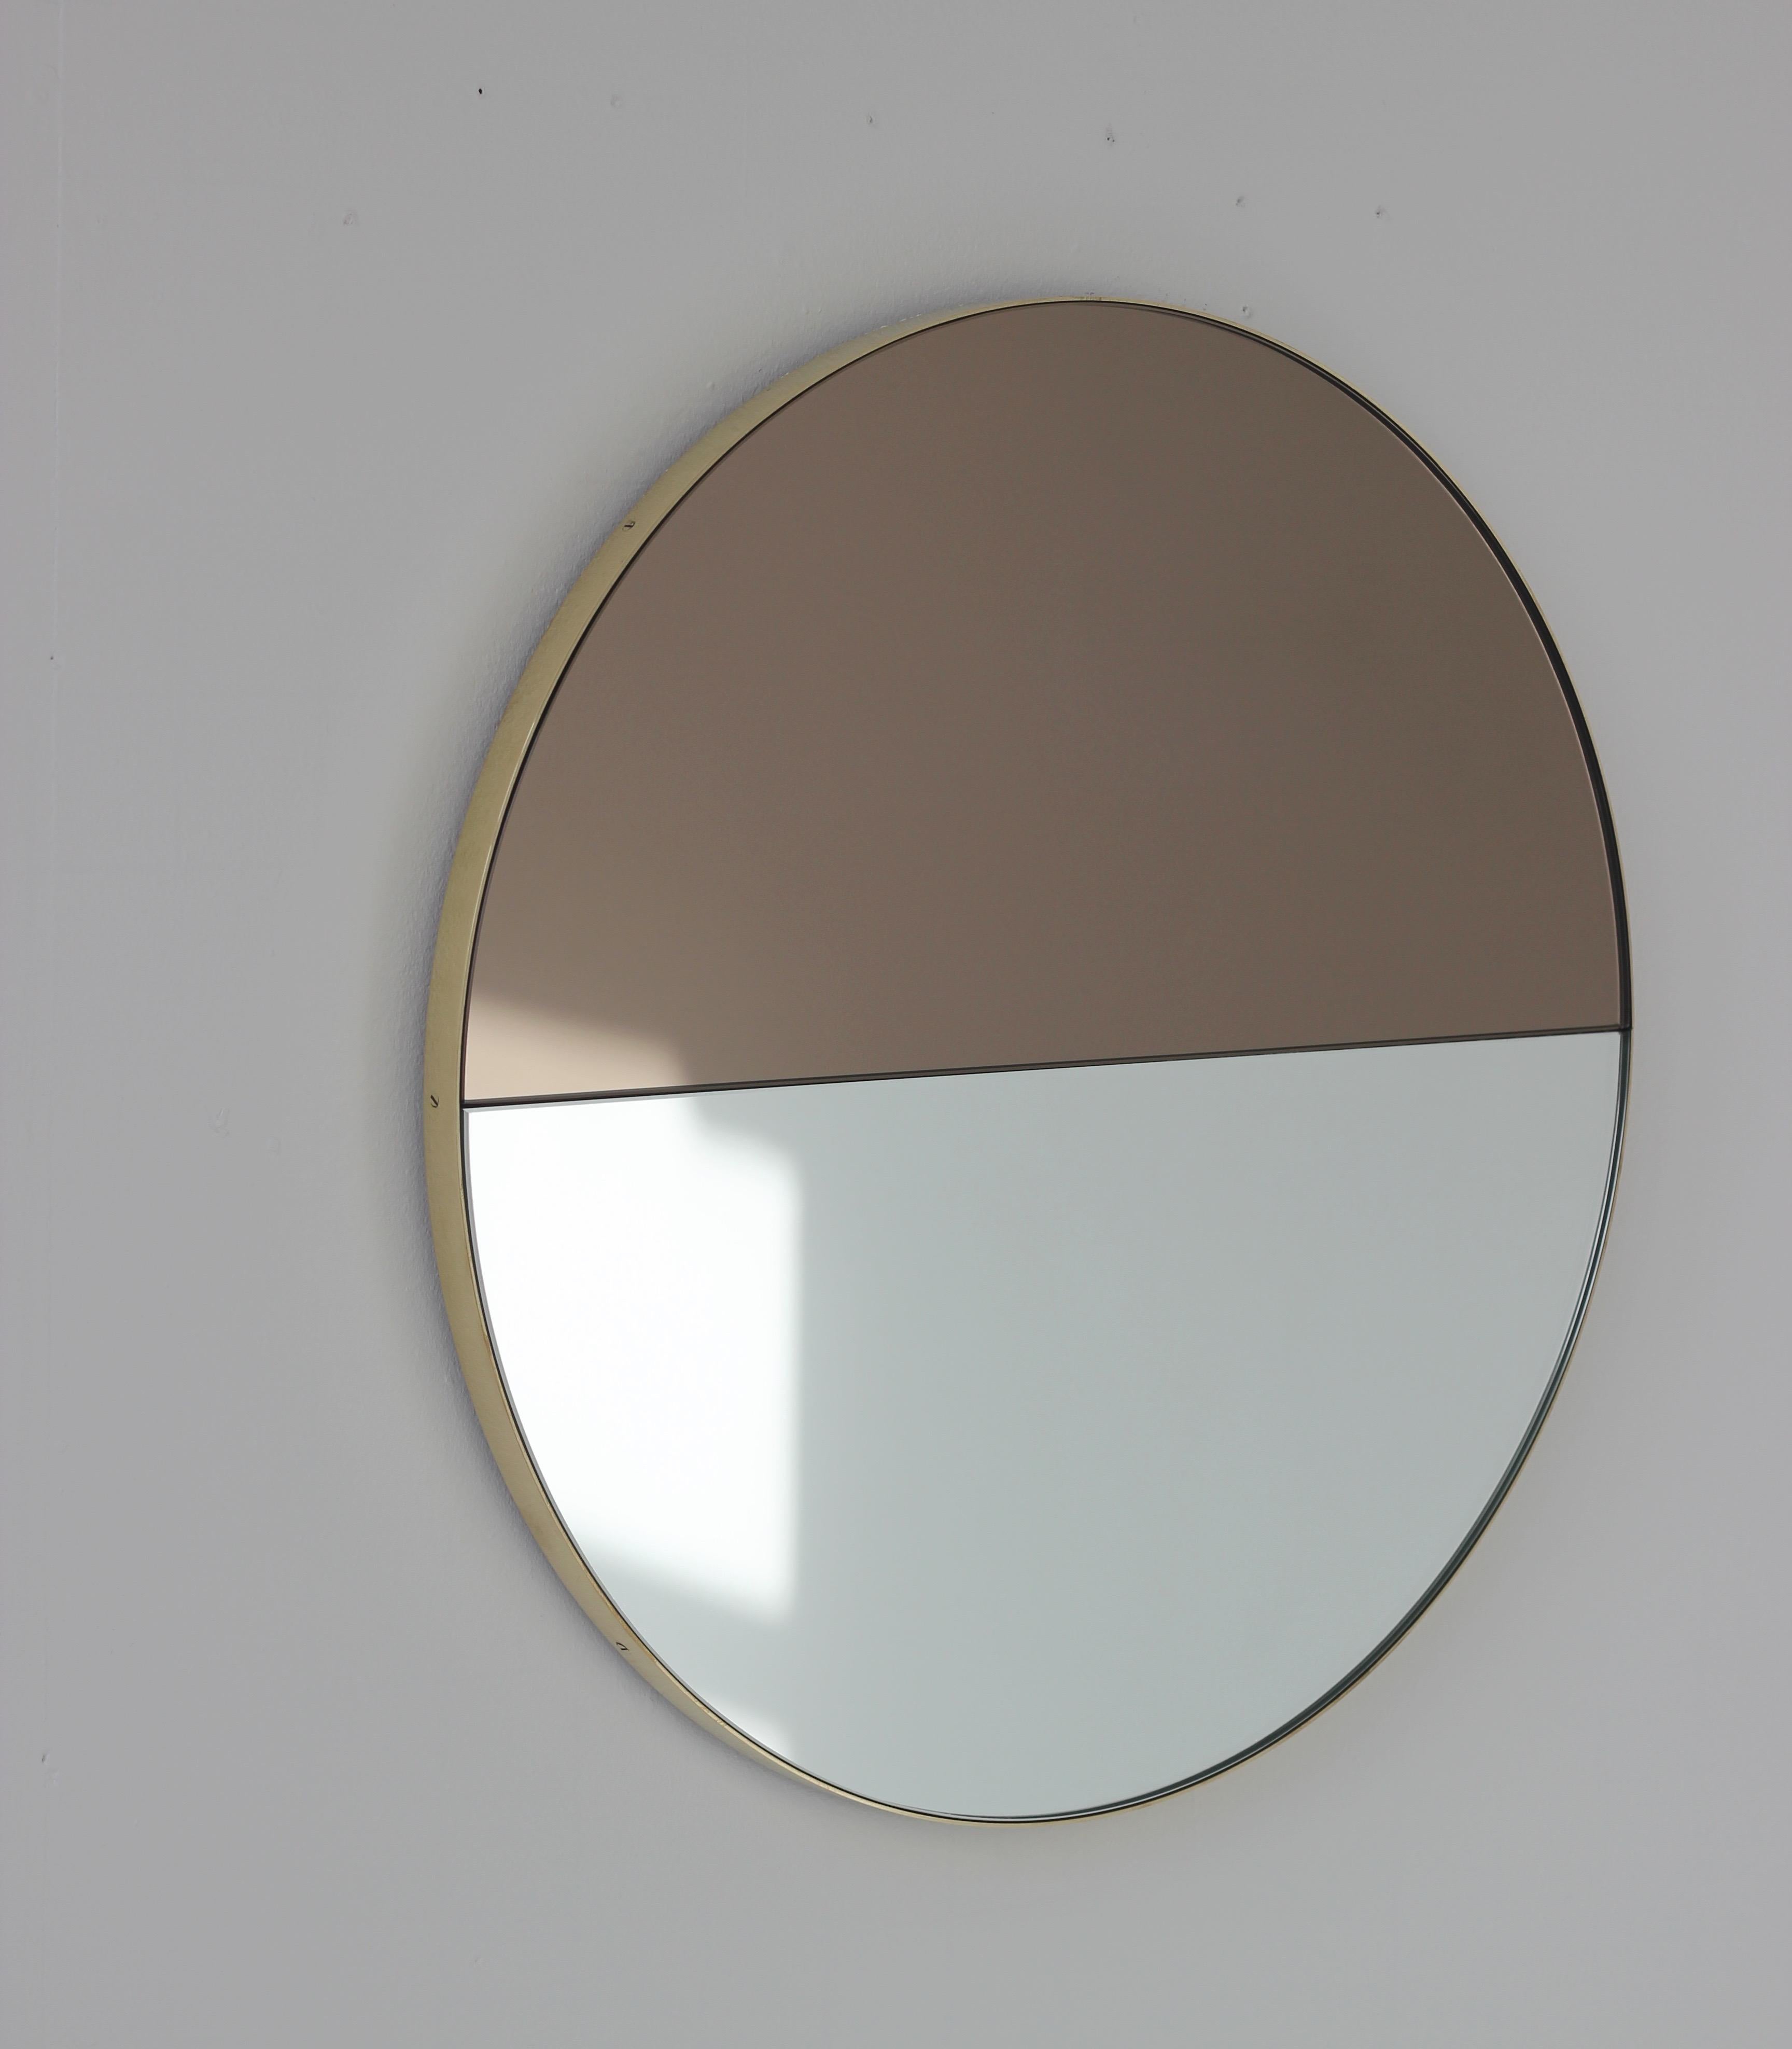 Brushed Orbis Dualis Mixed Silver and Bronze Round Mirror with Brass Frame, Large For Sale